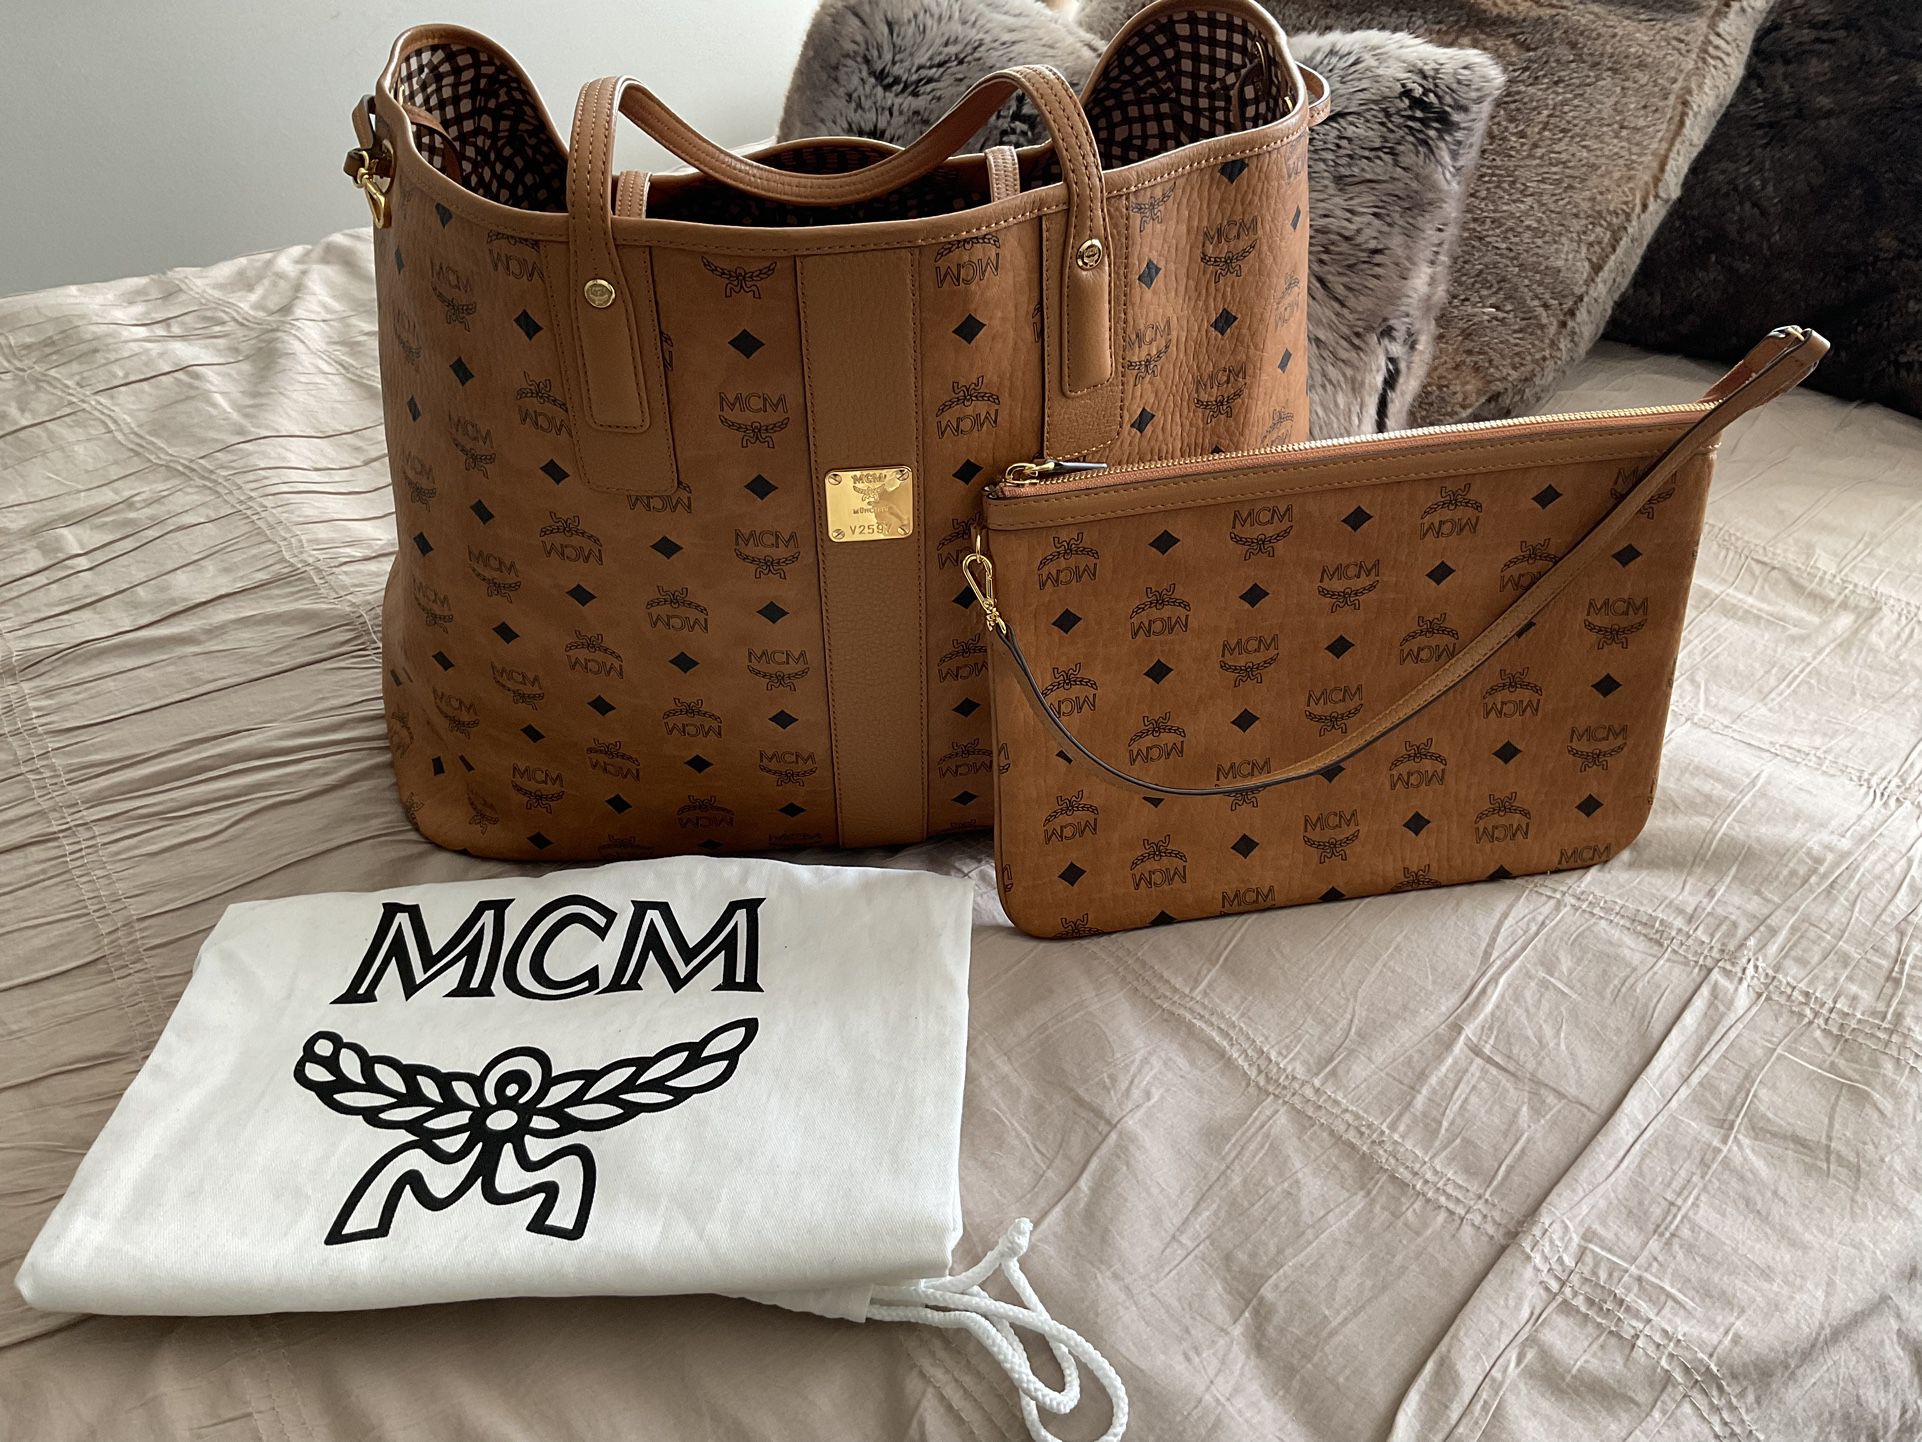 *NEW* MCM Large Liz Reversible Shopper Tote Retails $775 Plus Tax (so $850 Total) - Offered At Only $700!!